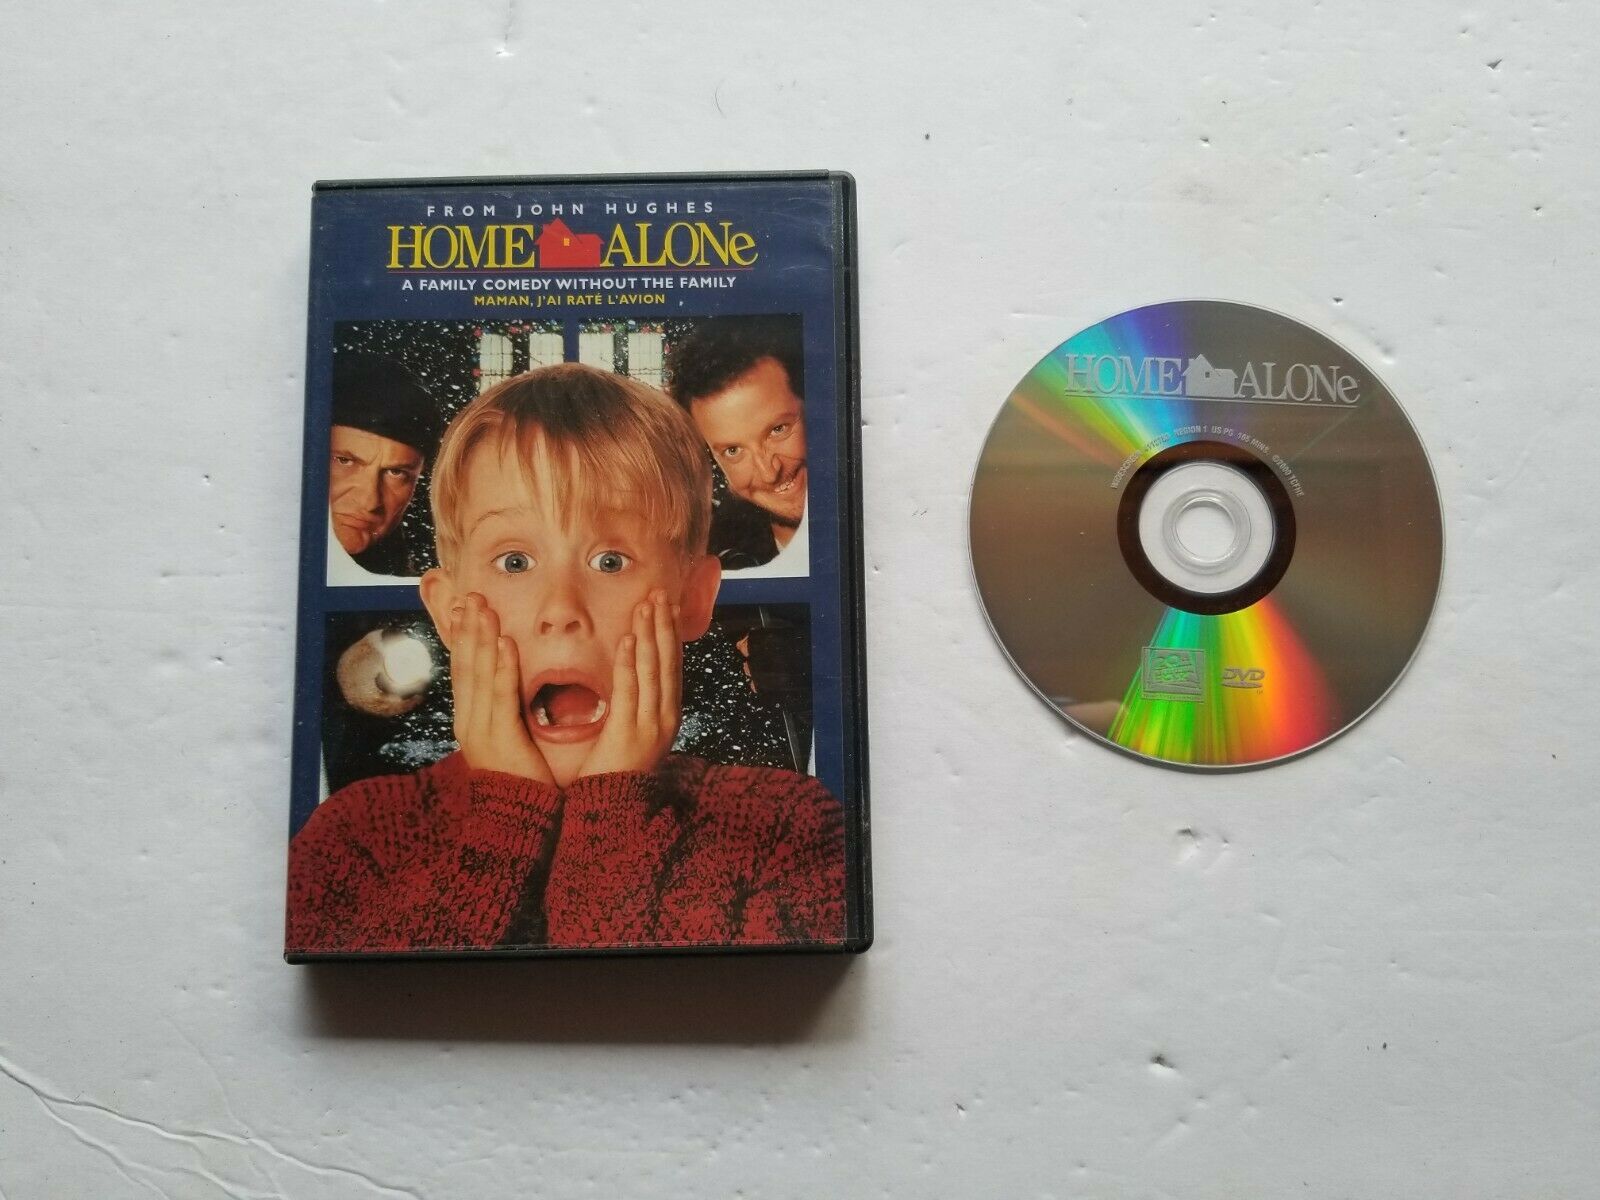 Primary image for Home Alone (DVD, 2006)